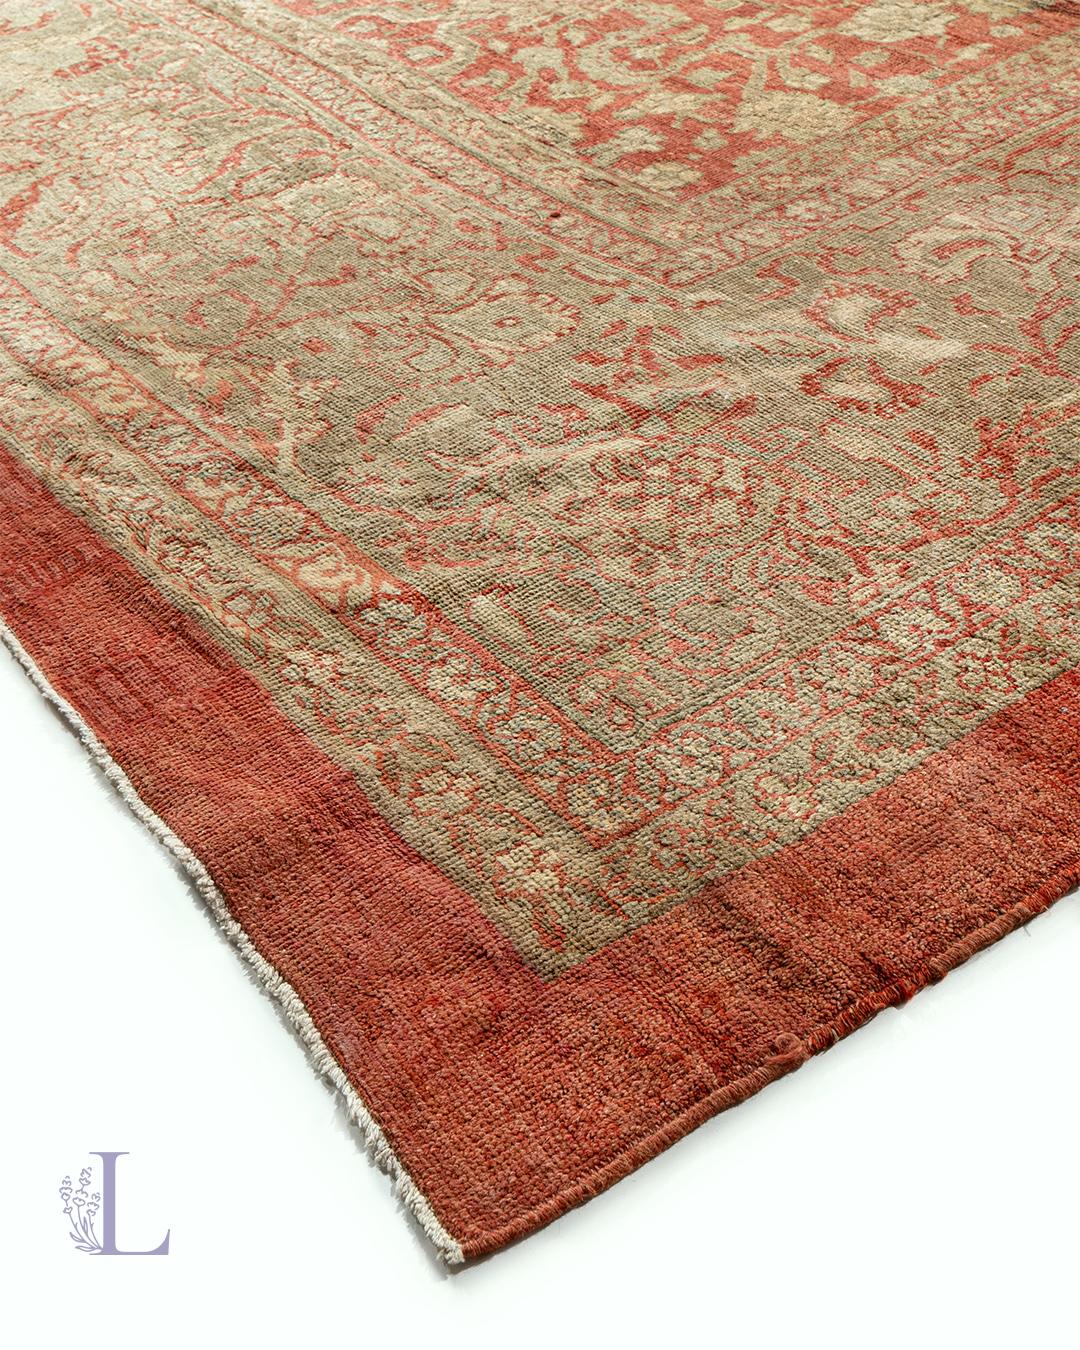 Antique Oversize Persian Terracotta Sultanabad Rug, circa 1880  17'6 x 23'9 For Sale 2